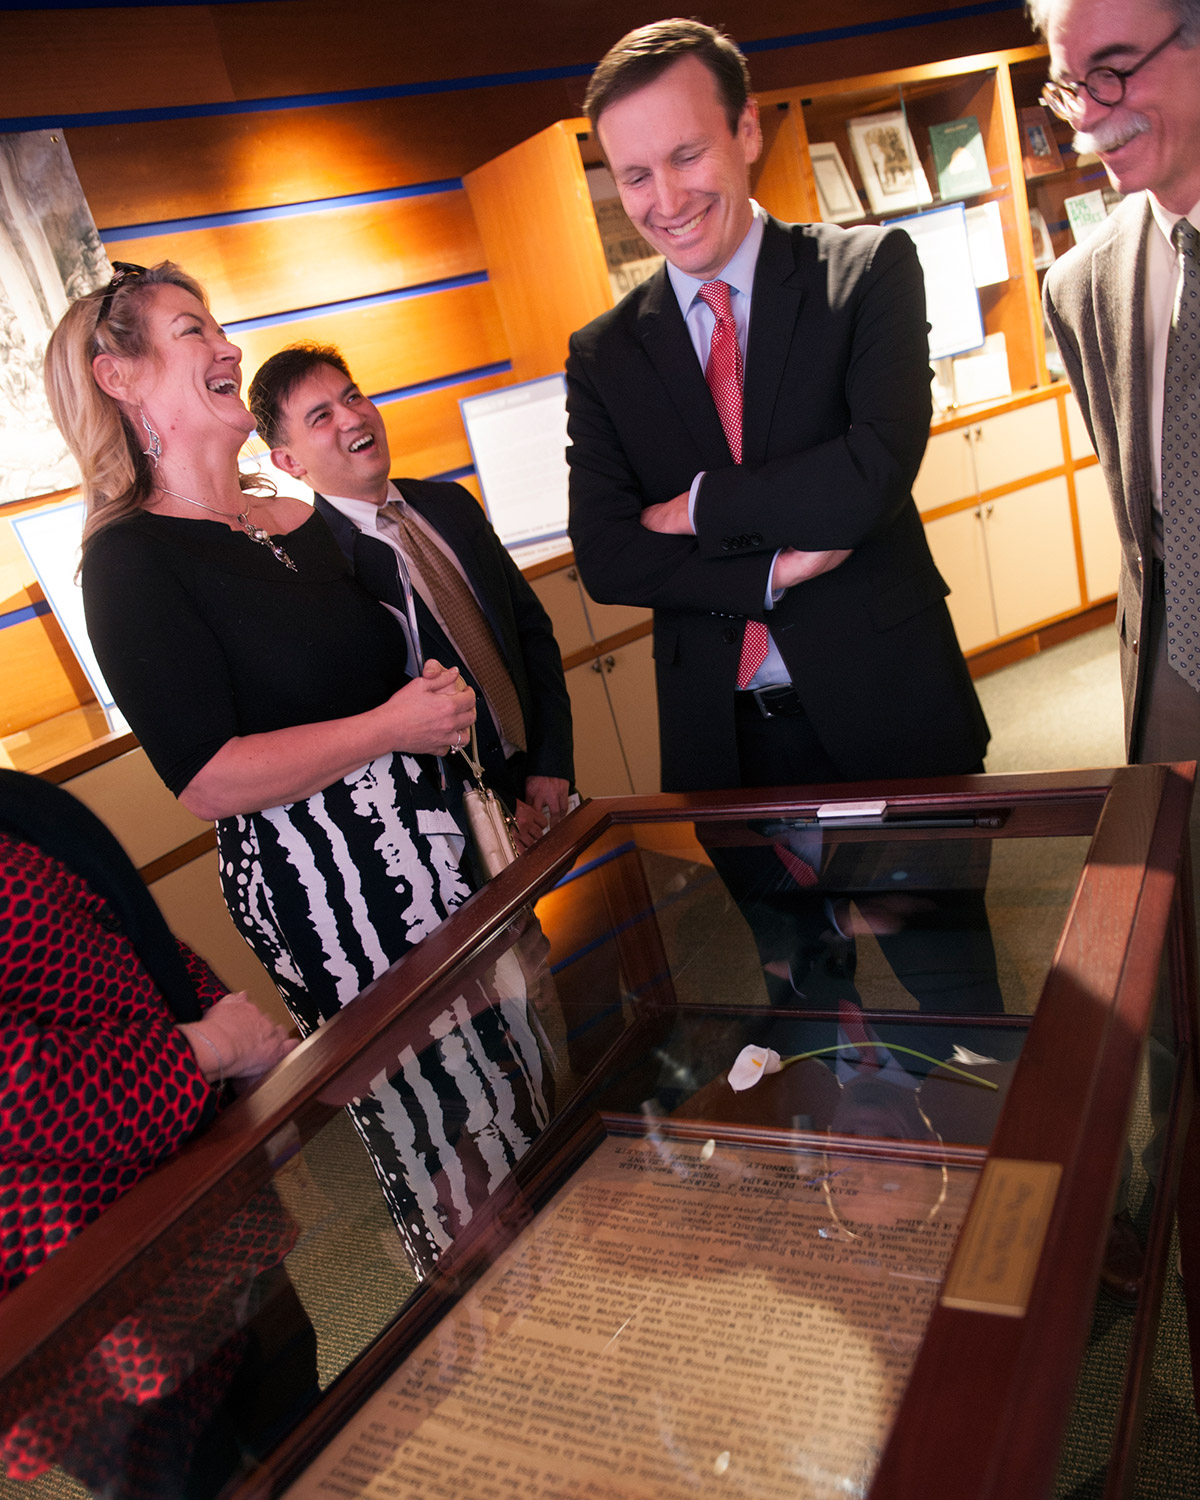 U.S. Senator Chris Murphy views an exhibition in the Lender Family Special Collection Room on the Mount Carmel Campus